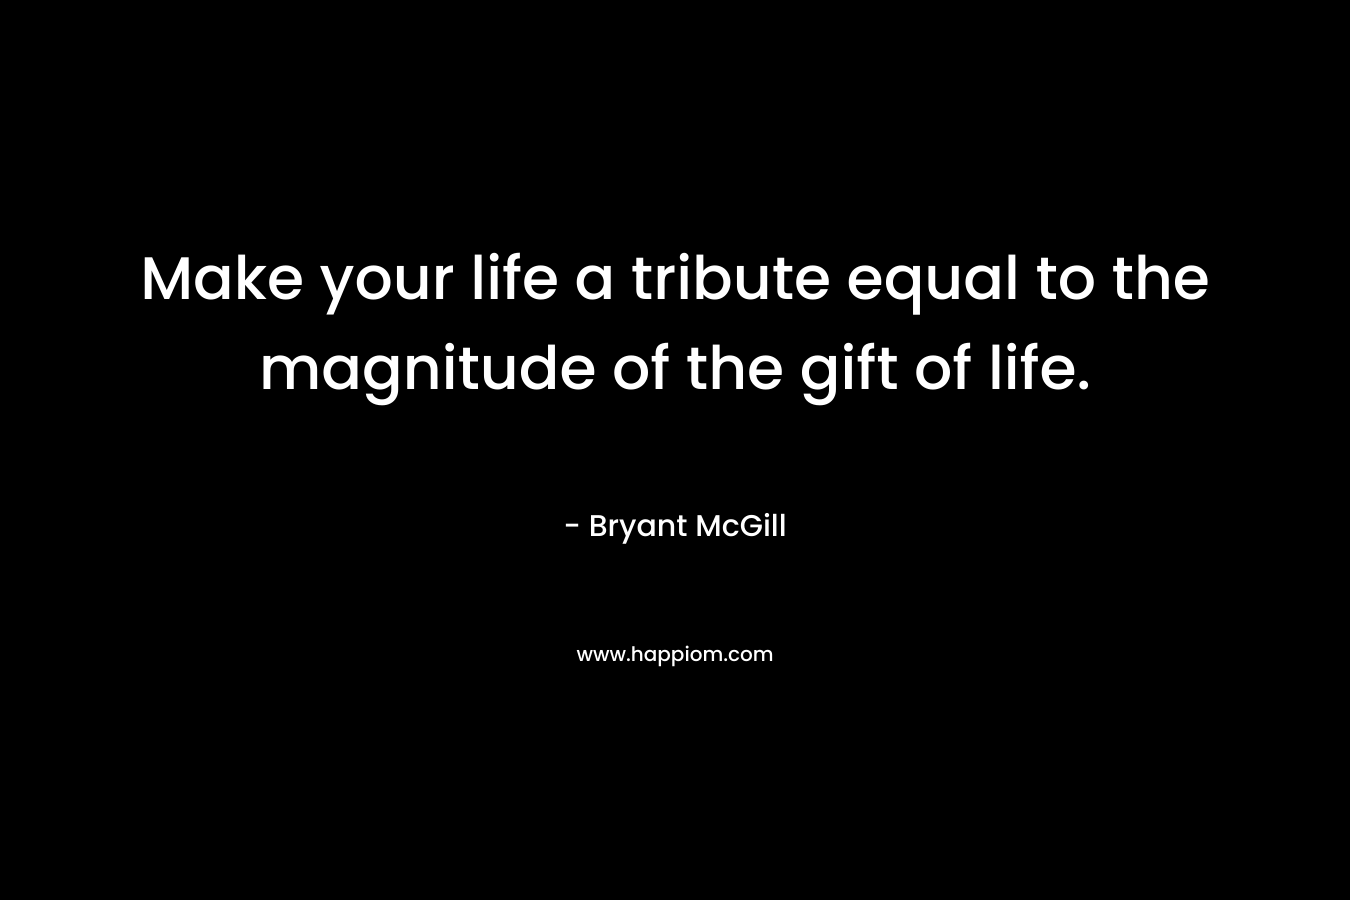 Make your life a tribute equal to the magnitude of the gift of life.